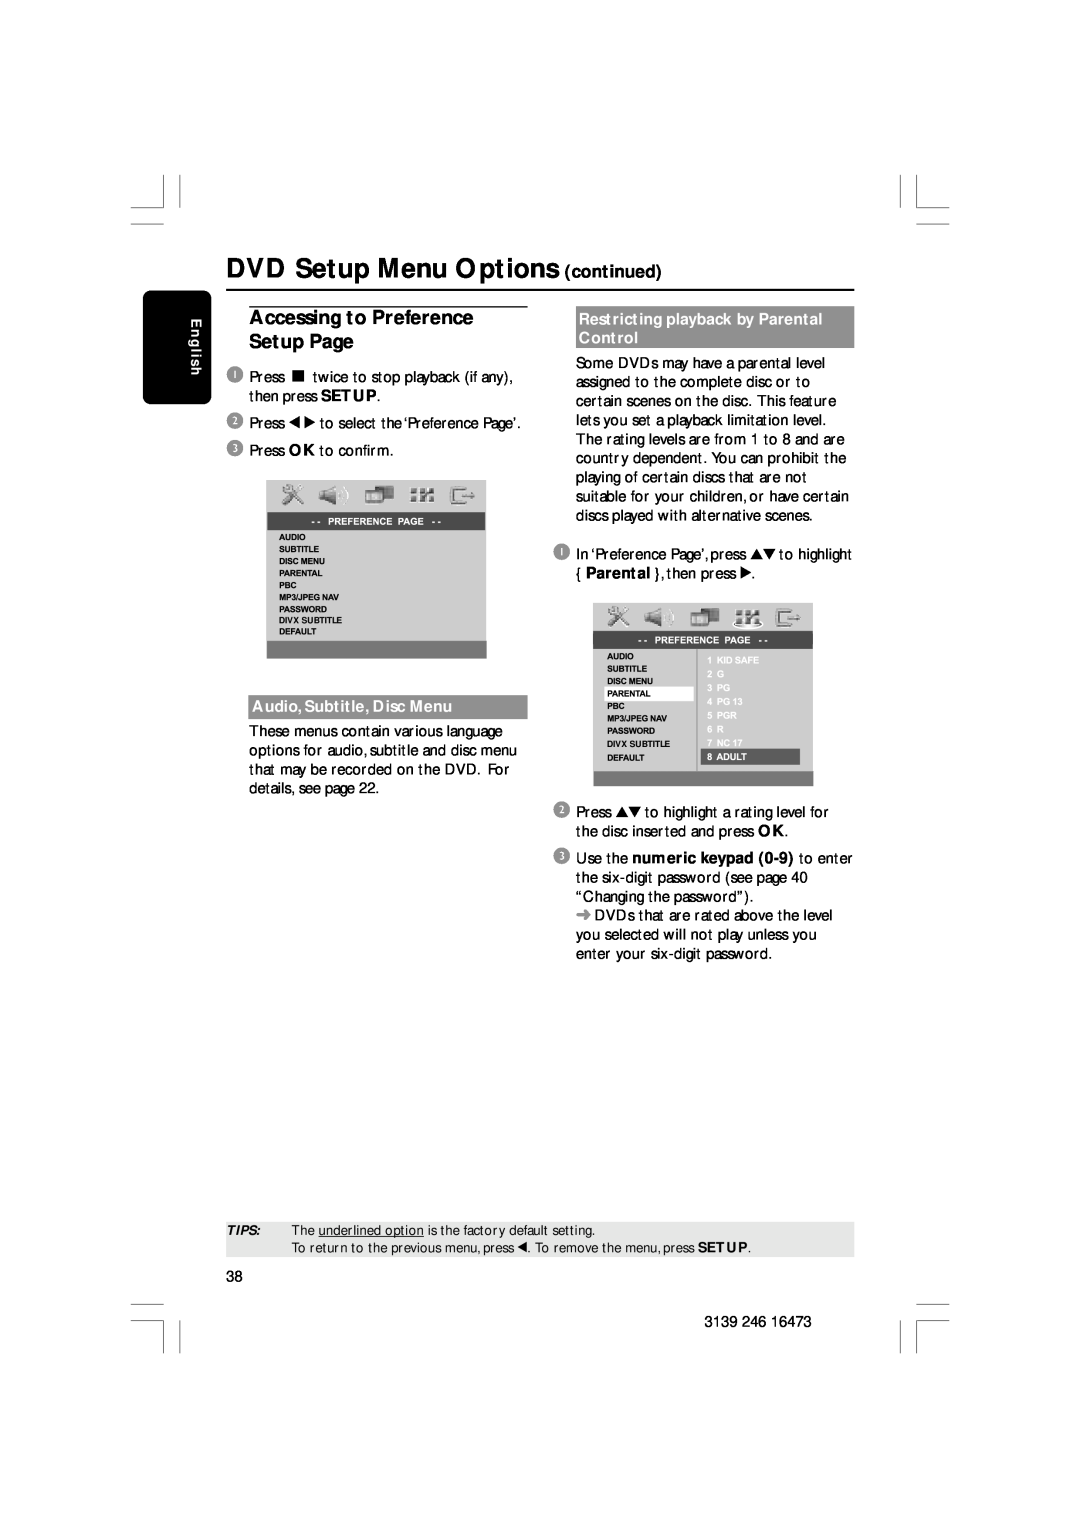 Philips HTS5510C Accessing to Preference Setup Page, DVD Setup Menu Options continued, Audio, Subtitle, Disc Menu 